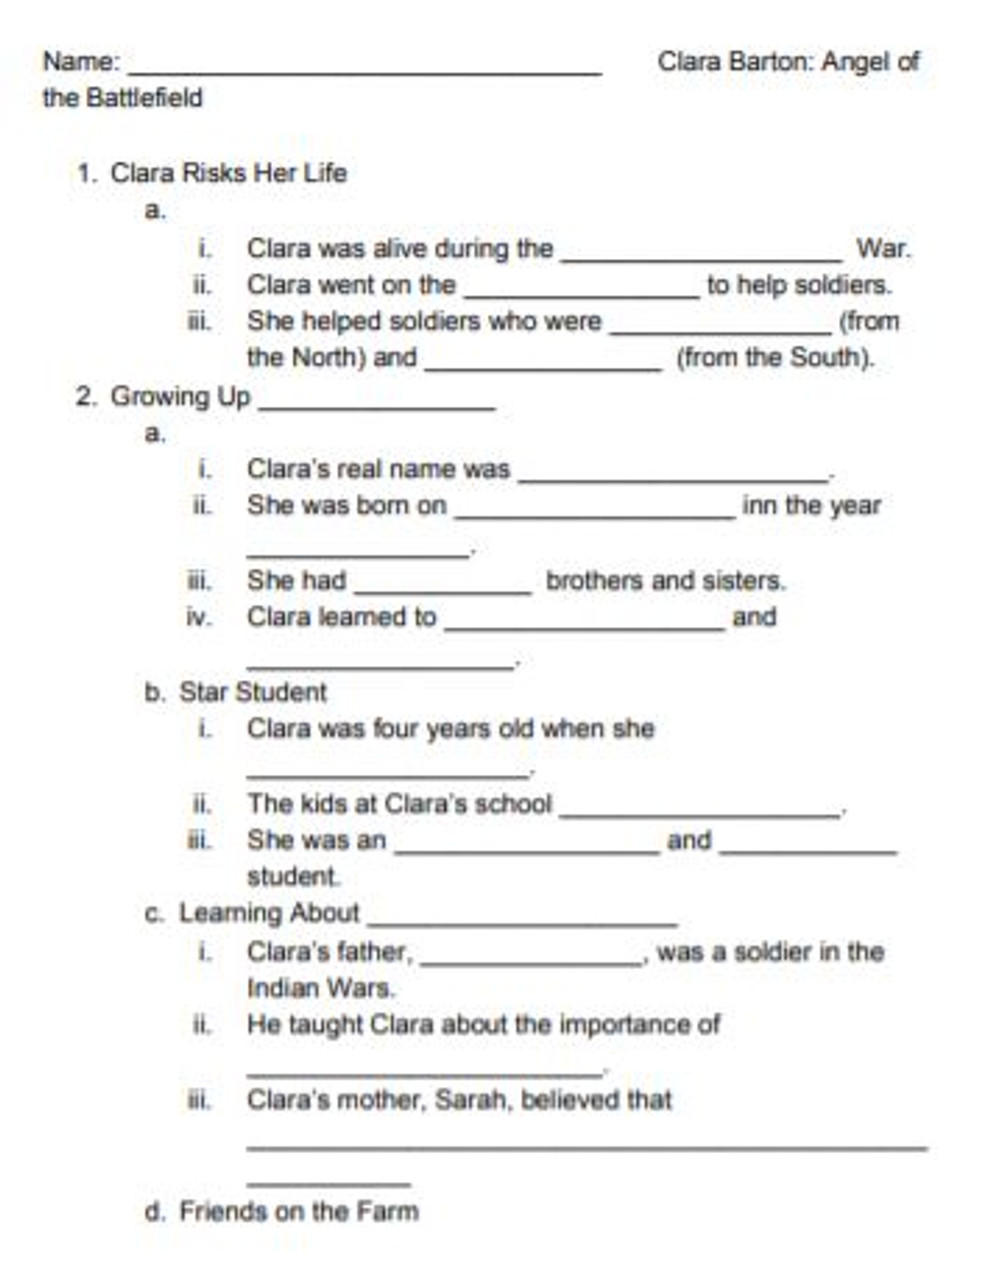 Clara Barton: Angel of the Battlefield Outline Cloze Biography Time for Kids